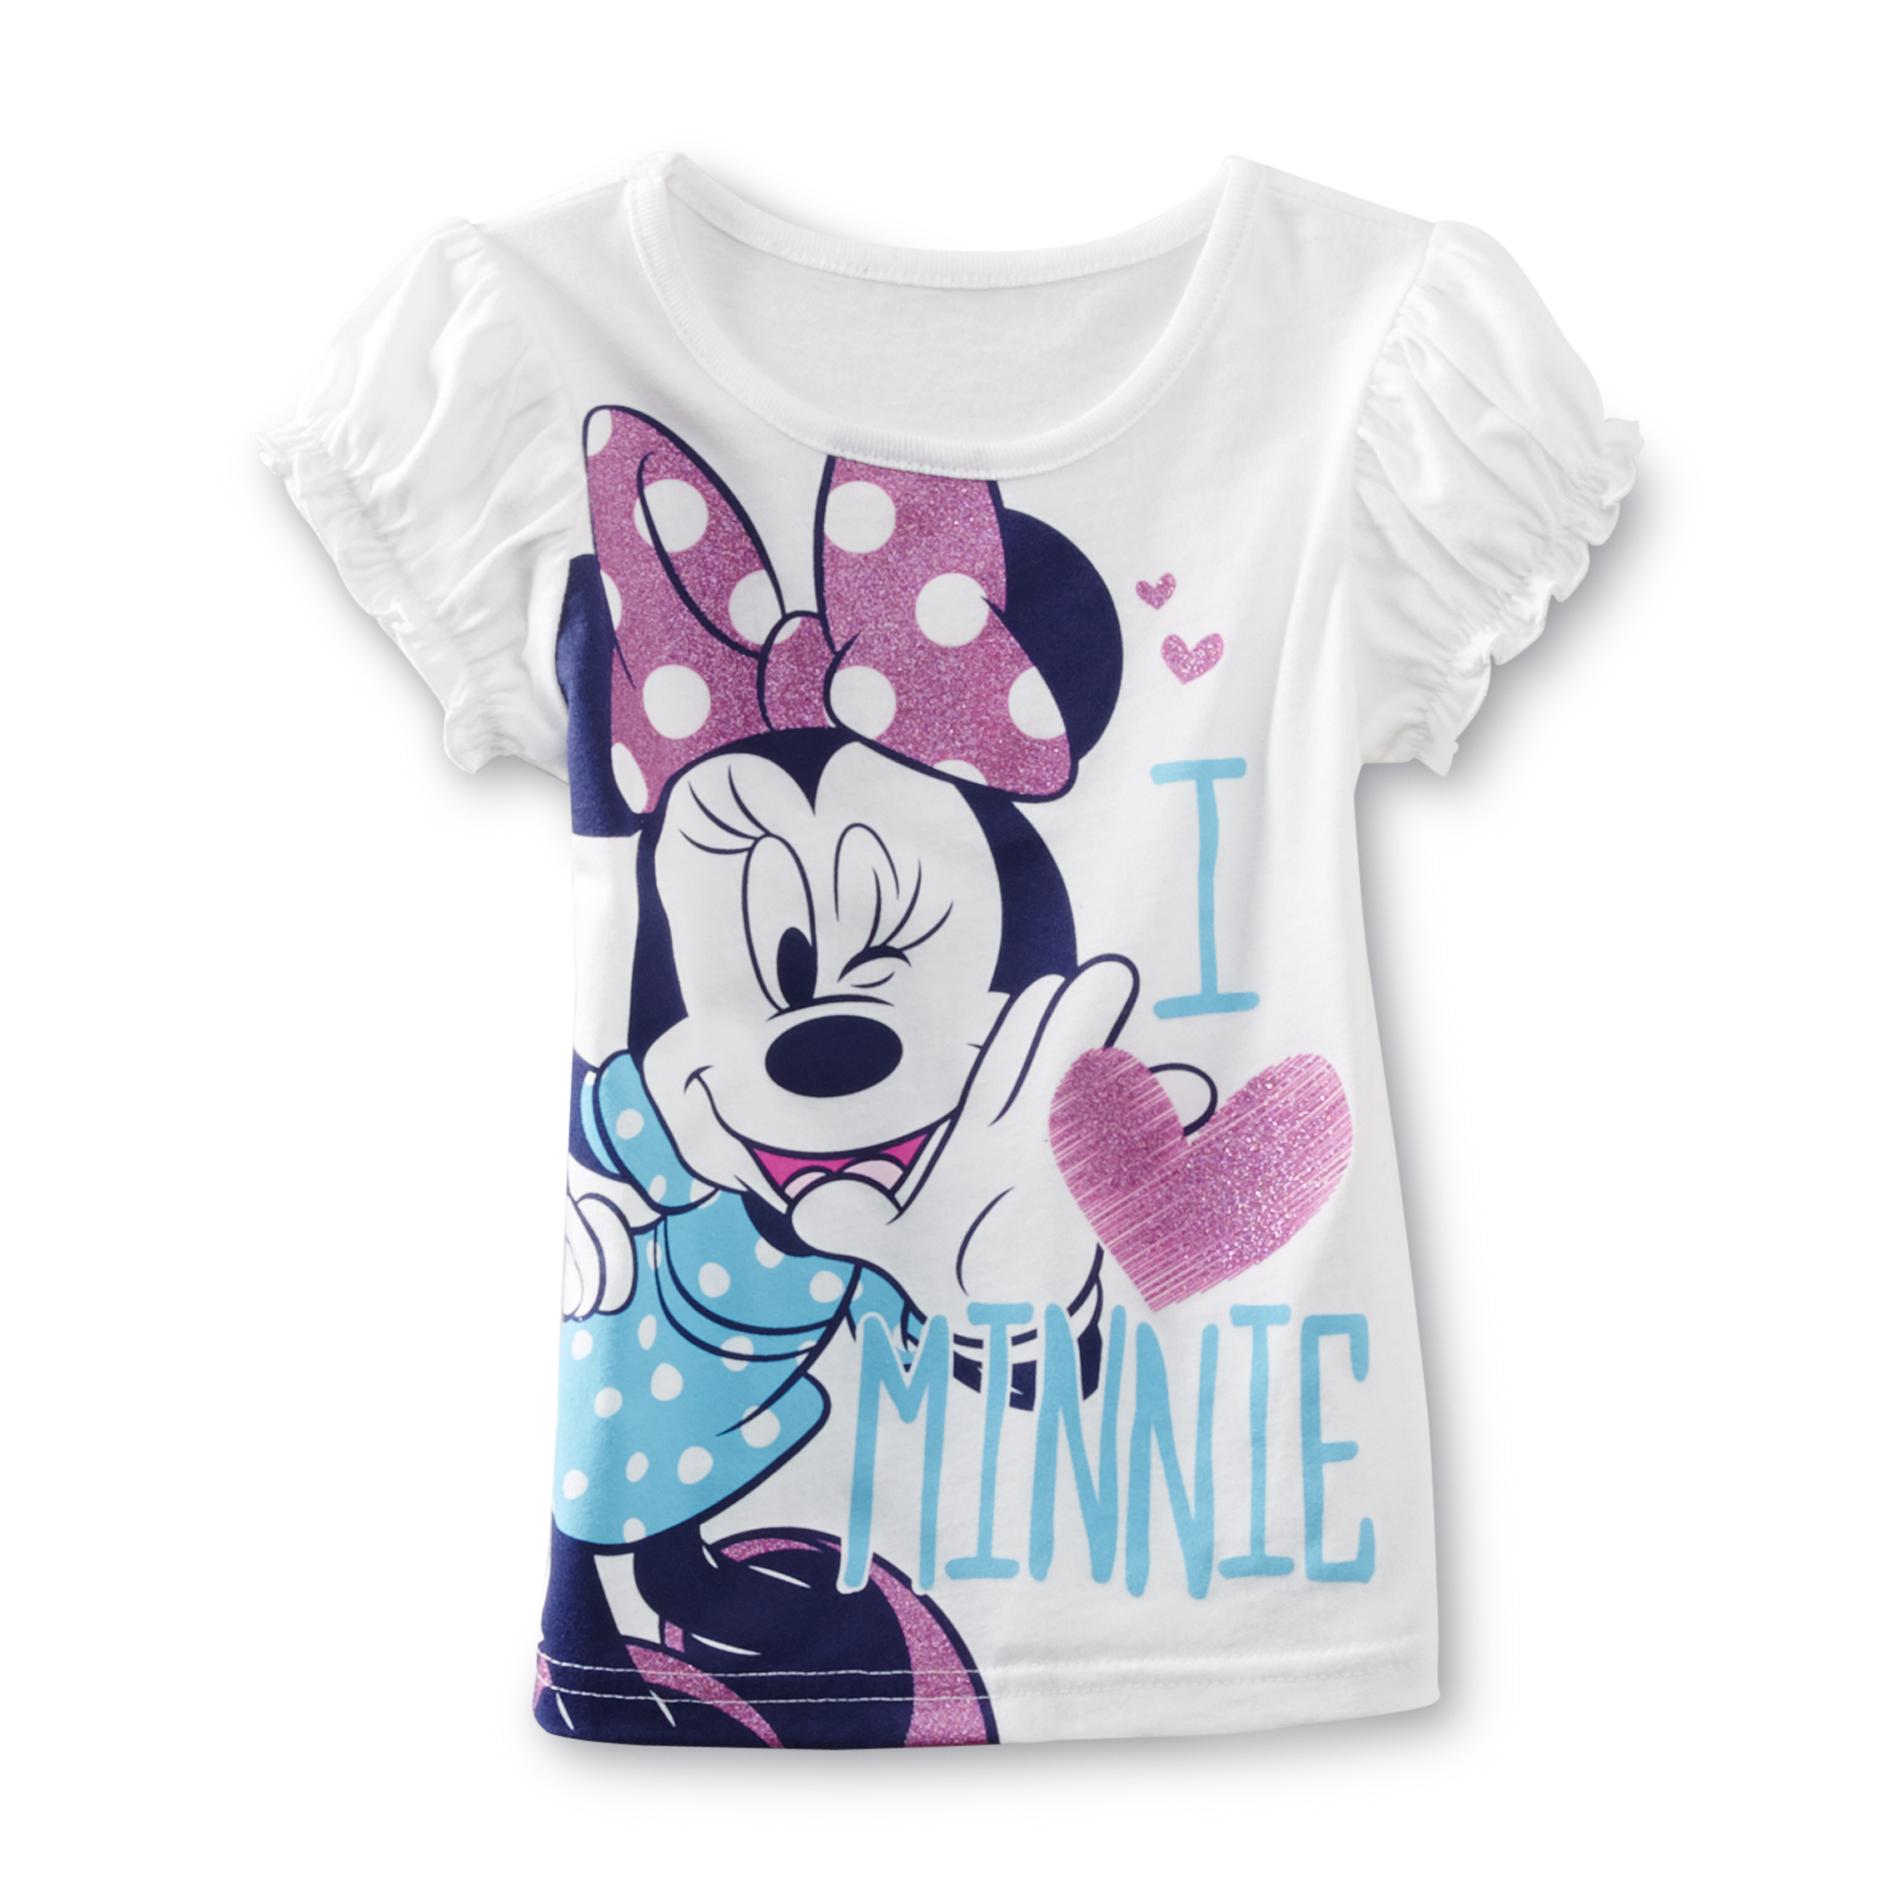 Disney Minnie Mouse Infant & Toddler Girl's Graphic Top